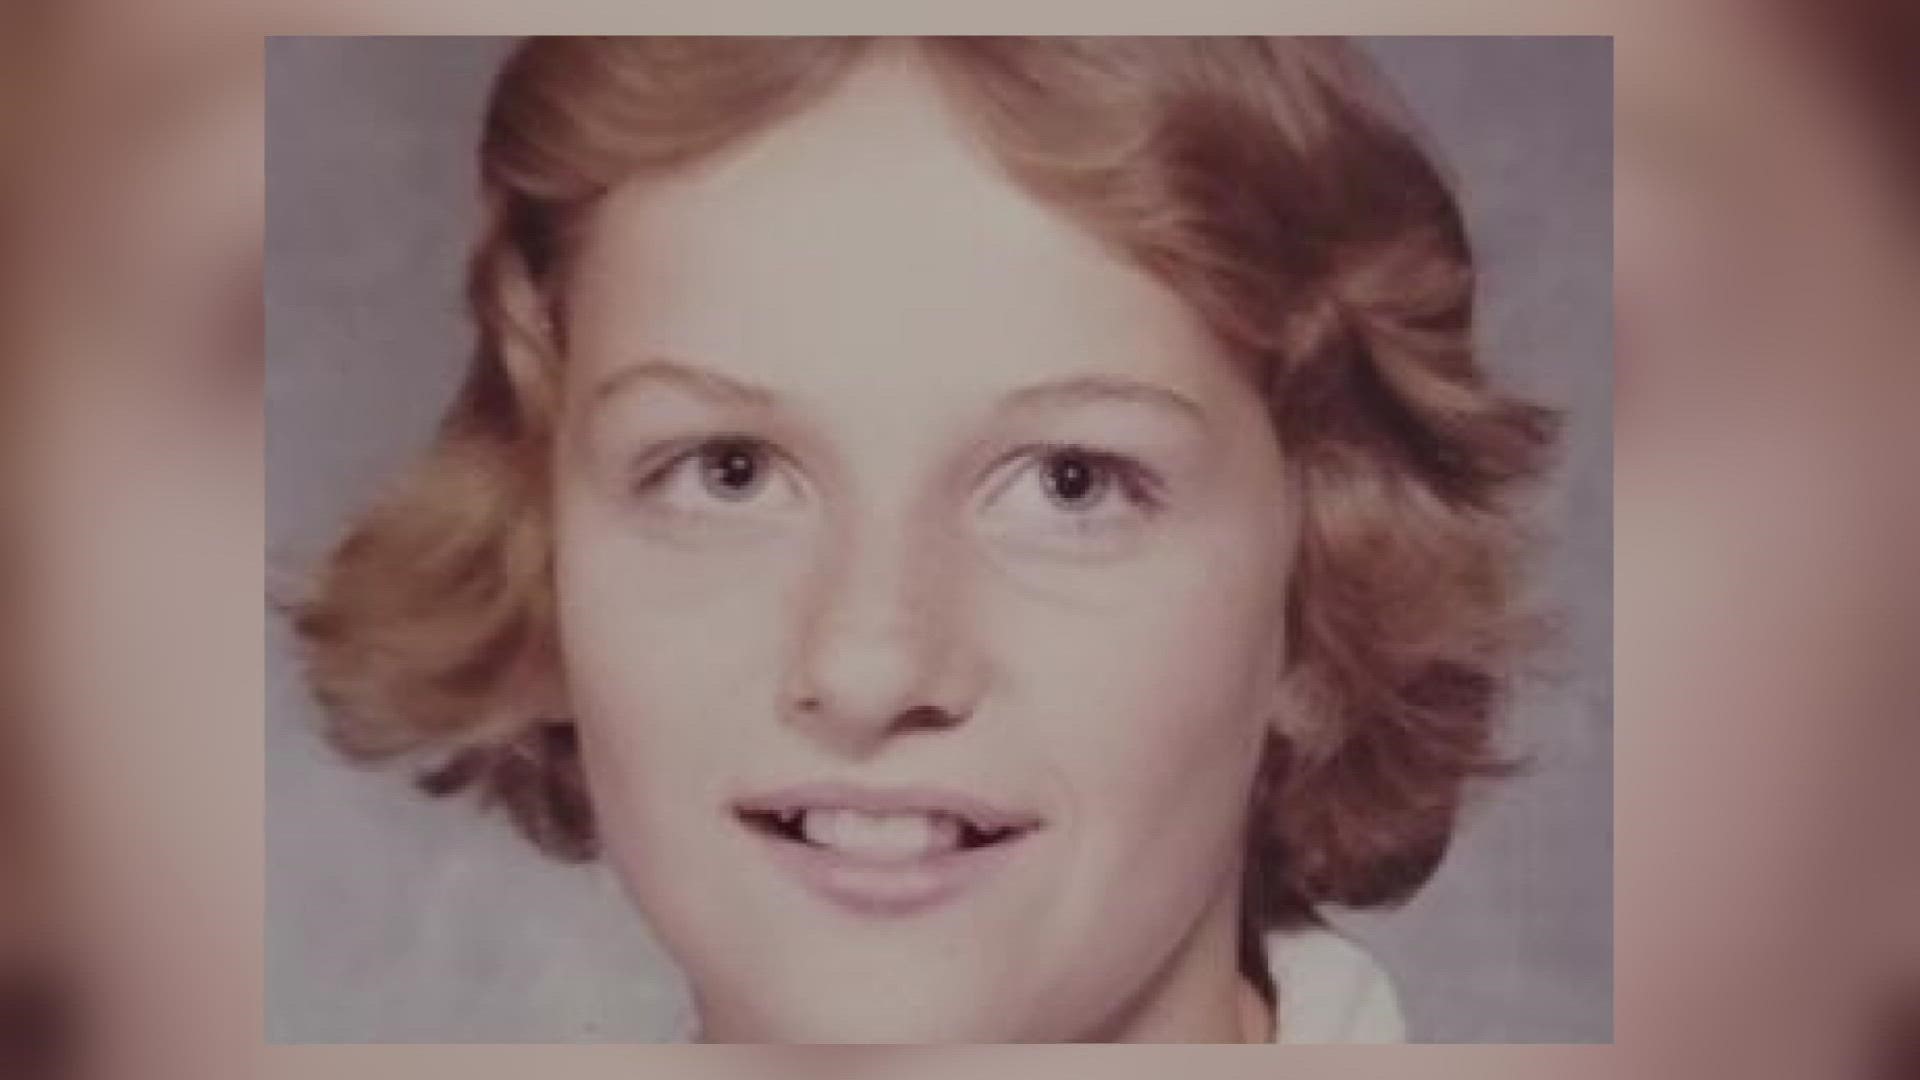 Tracy Sue Walker went missing from Indiana when she was 15 years old. Now, the Tennessee Bureau of Investigation is trying to find out how she ended up in Tennessee.